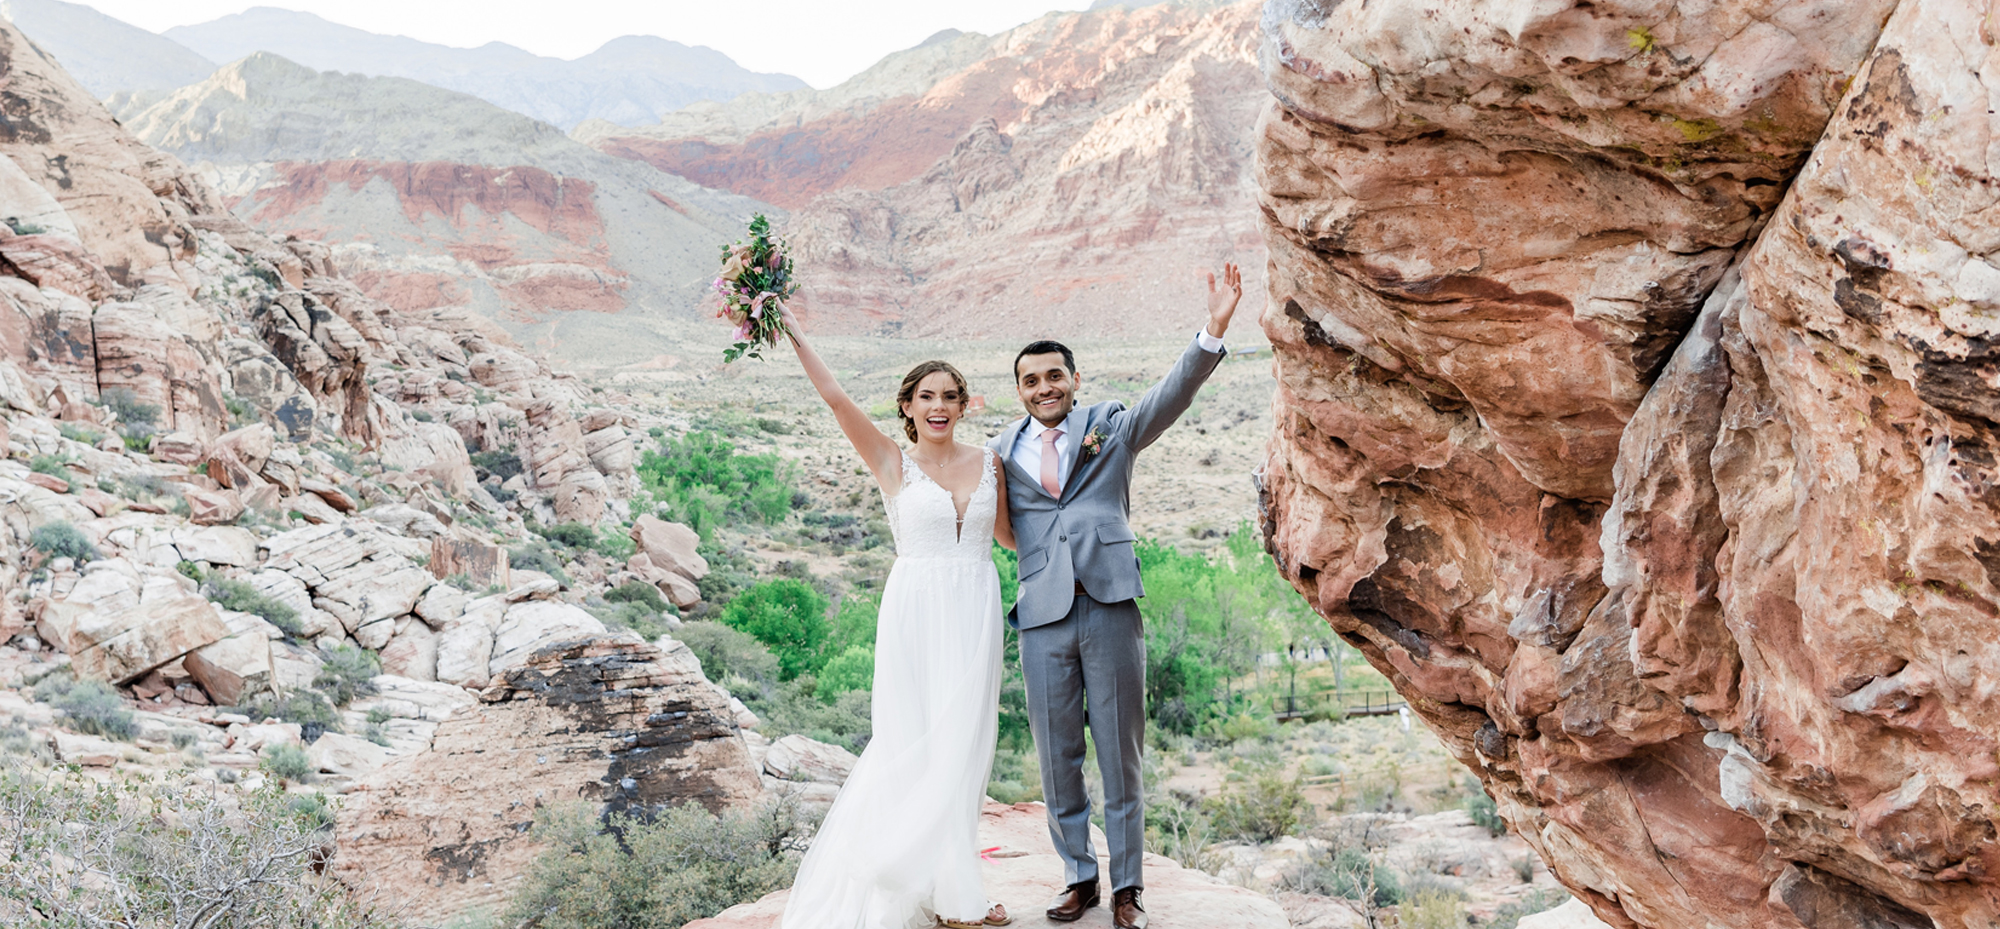 14 Elopement and Micro Wedding Trends for 2022